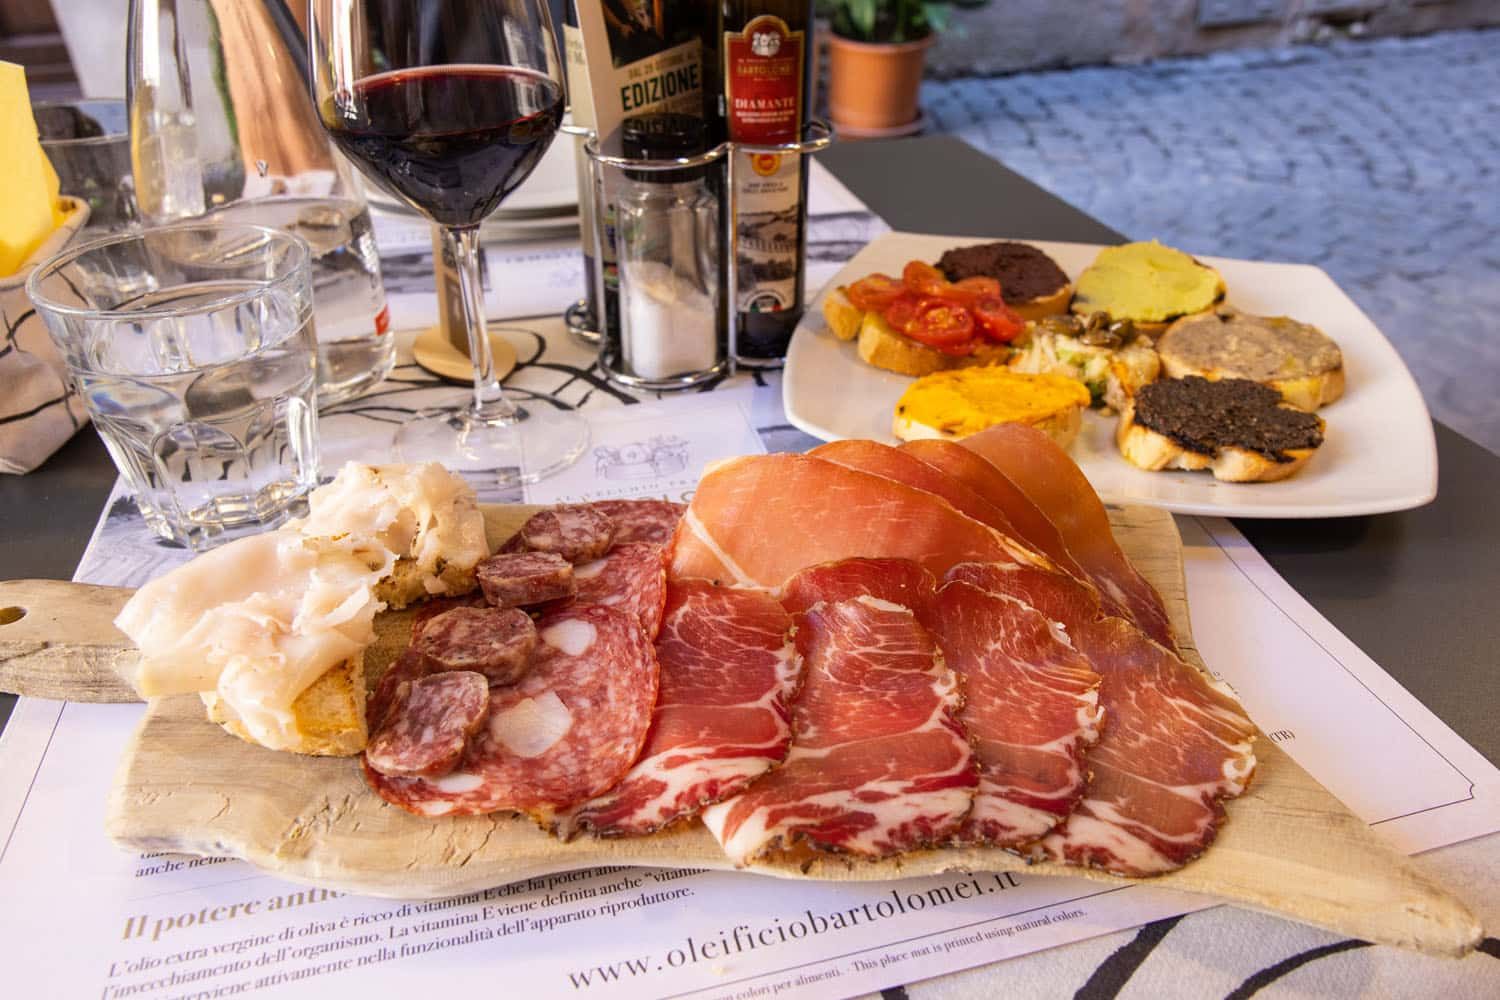 Lunch in Tuscany